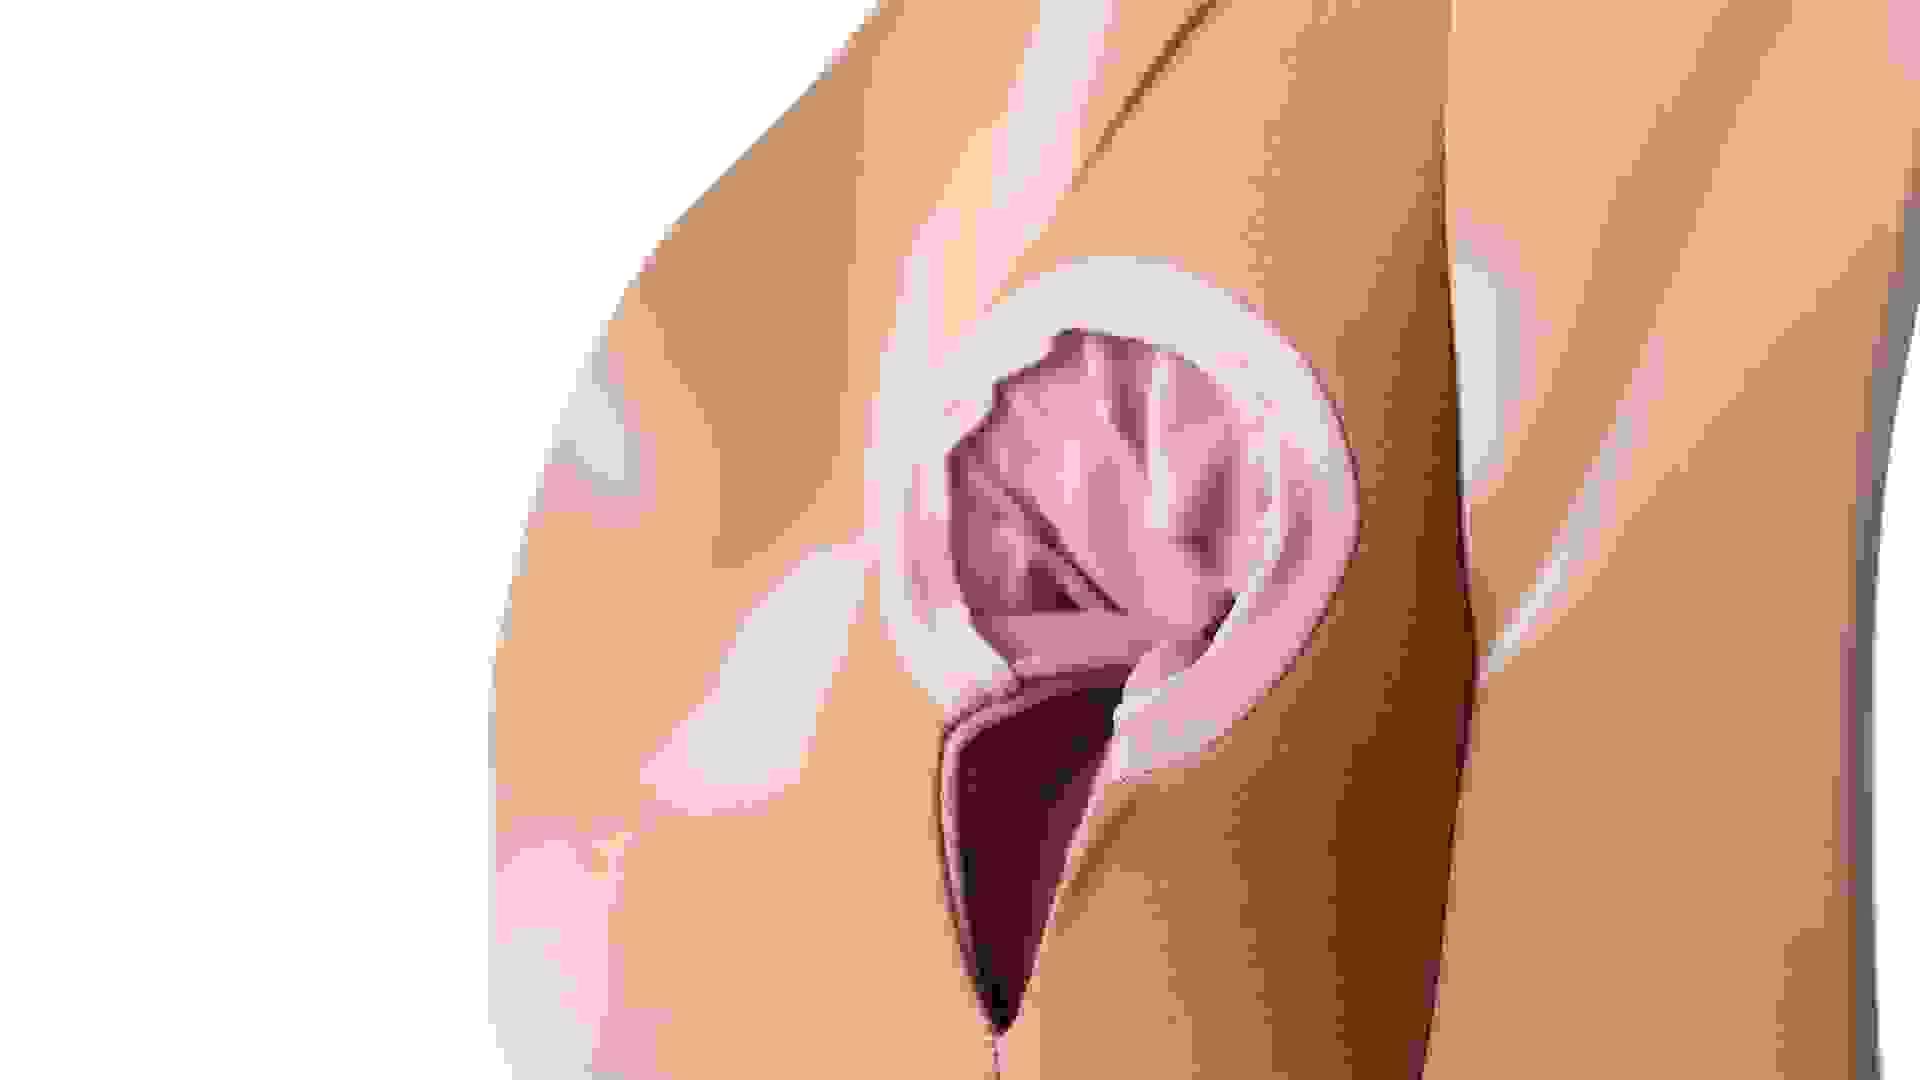 Perineal Repair: Improving Knowledge, Confidence, and Skills